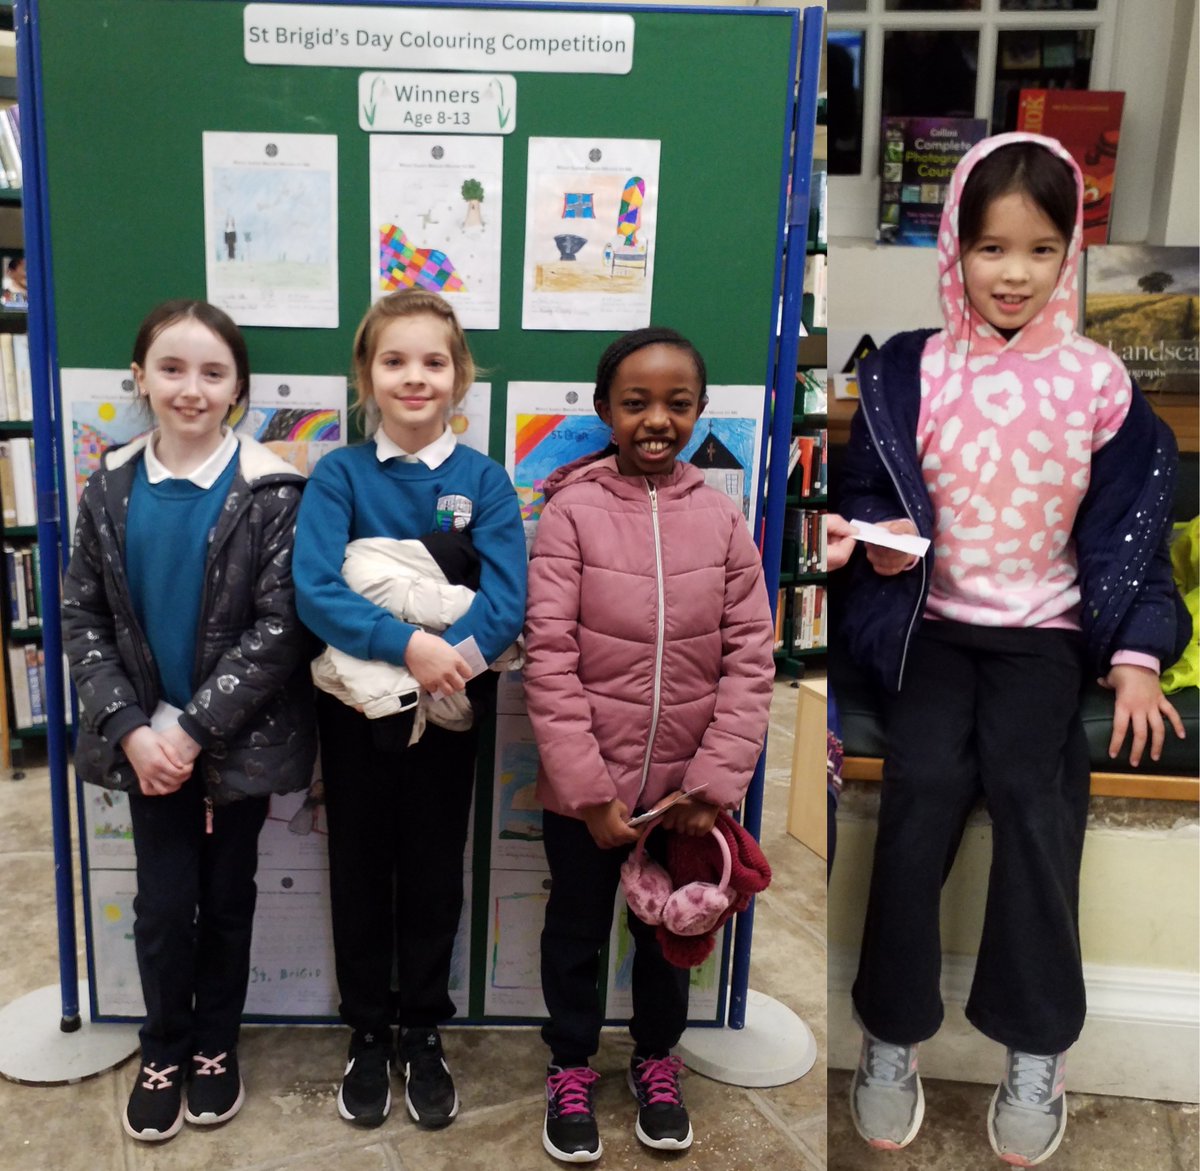 Well done to Caoimhe, Aoife, Melanie & Taeya, some of Boyle’s winners of the St Brigid's Day colouring competition, pictured here collecting their well-earned book vouchers! 🖍️🎨 @RoscommonCoco @LibrariesIre #Boyle